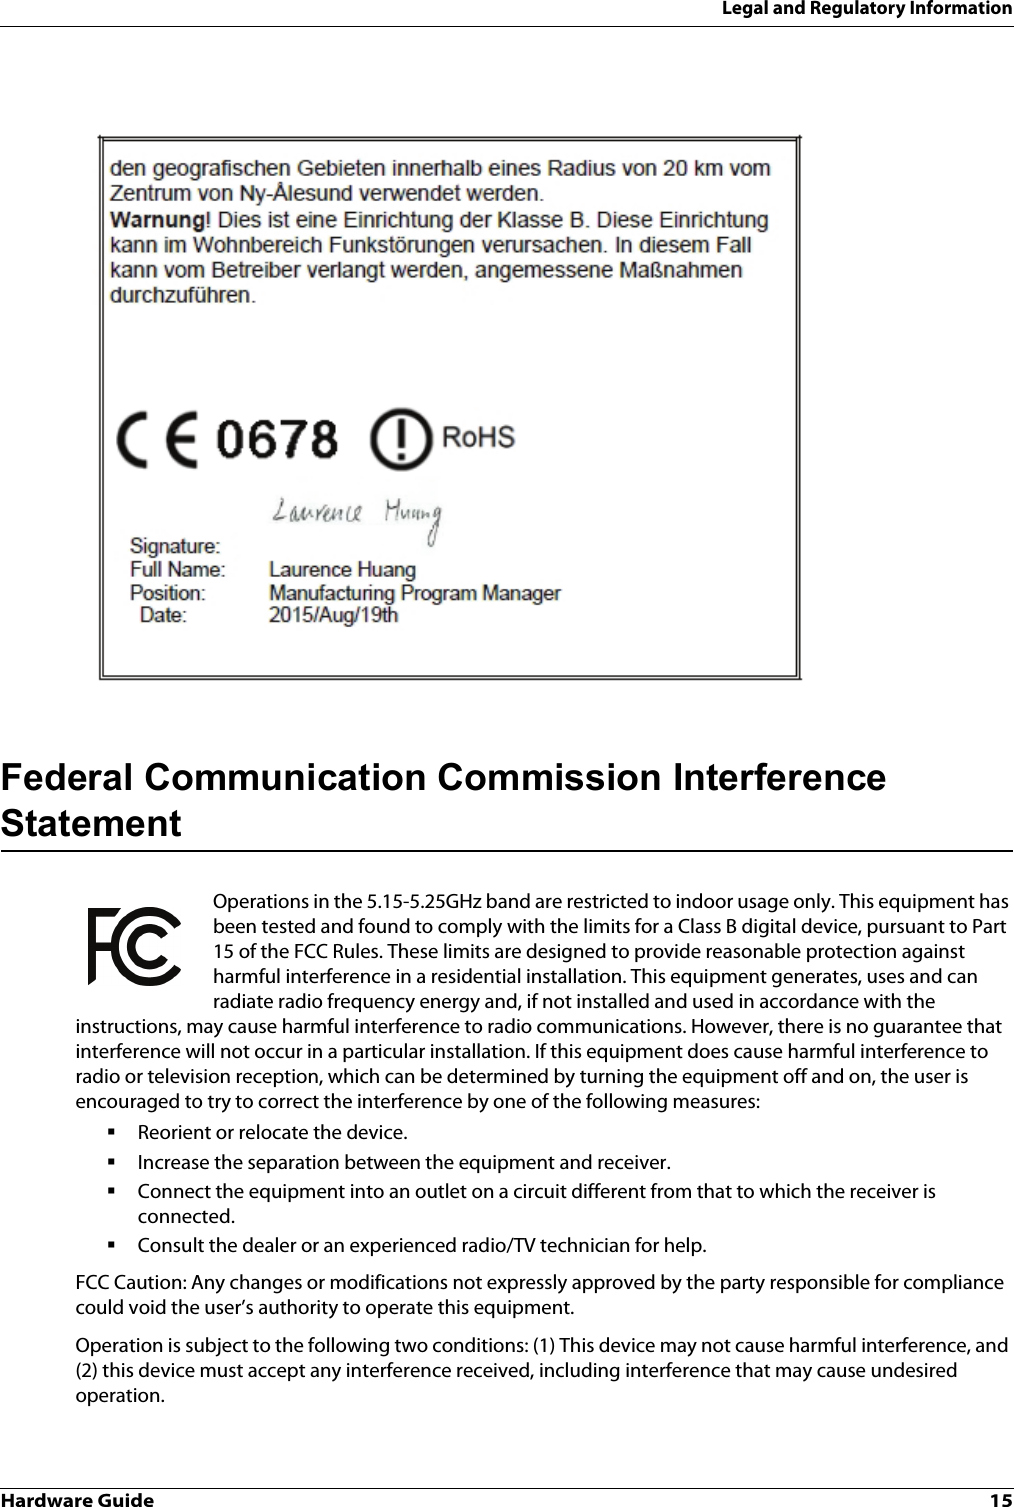 Hardware Guide 15Legal and Regulatory InformationFederal Communication Commission Interference StatementOperations in the 5.15-5.25GHz band are restricted to indoor usage only. This equipment has been tested and found to comply with the limits for a Class B digital device, pursuant to Part 15 of the FCC Rules. These limits are designed to provide reasonable protection against harmful interference in a residential installation. This equipment generates, uses and can radiate radio frequency energy and, if not installed and used in accordance with the instructions, may cause harmful interference to radio communications. However, there is no guarantee that interference will not occur in a particular installation. If this equipment does cause harmful interference to radio or television reception, which can be determined by turning the equipment off and on, the user is encouraged to try to correct the interference by one of the following measures:Reorient or relocate the device.Increase the separation between the equipment and receiver.Connect the equipment into an outlet on a circuit different from that to which the receiver is connected.Consult the dealer or an experienced radio/TV technician for help.FCC Caution: Any changes or modifications not expressly approved by the party responsible for compliance could void the user’s authority to operate this equipment.Operation is subject to the following two conditions: (1) This device may not cause harmful interference, and (2) this device must accept any interference received, including interference that may cause undesired operation.